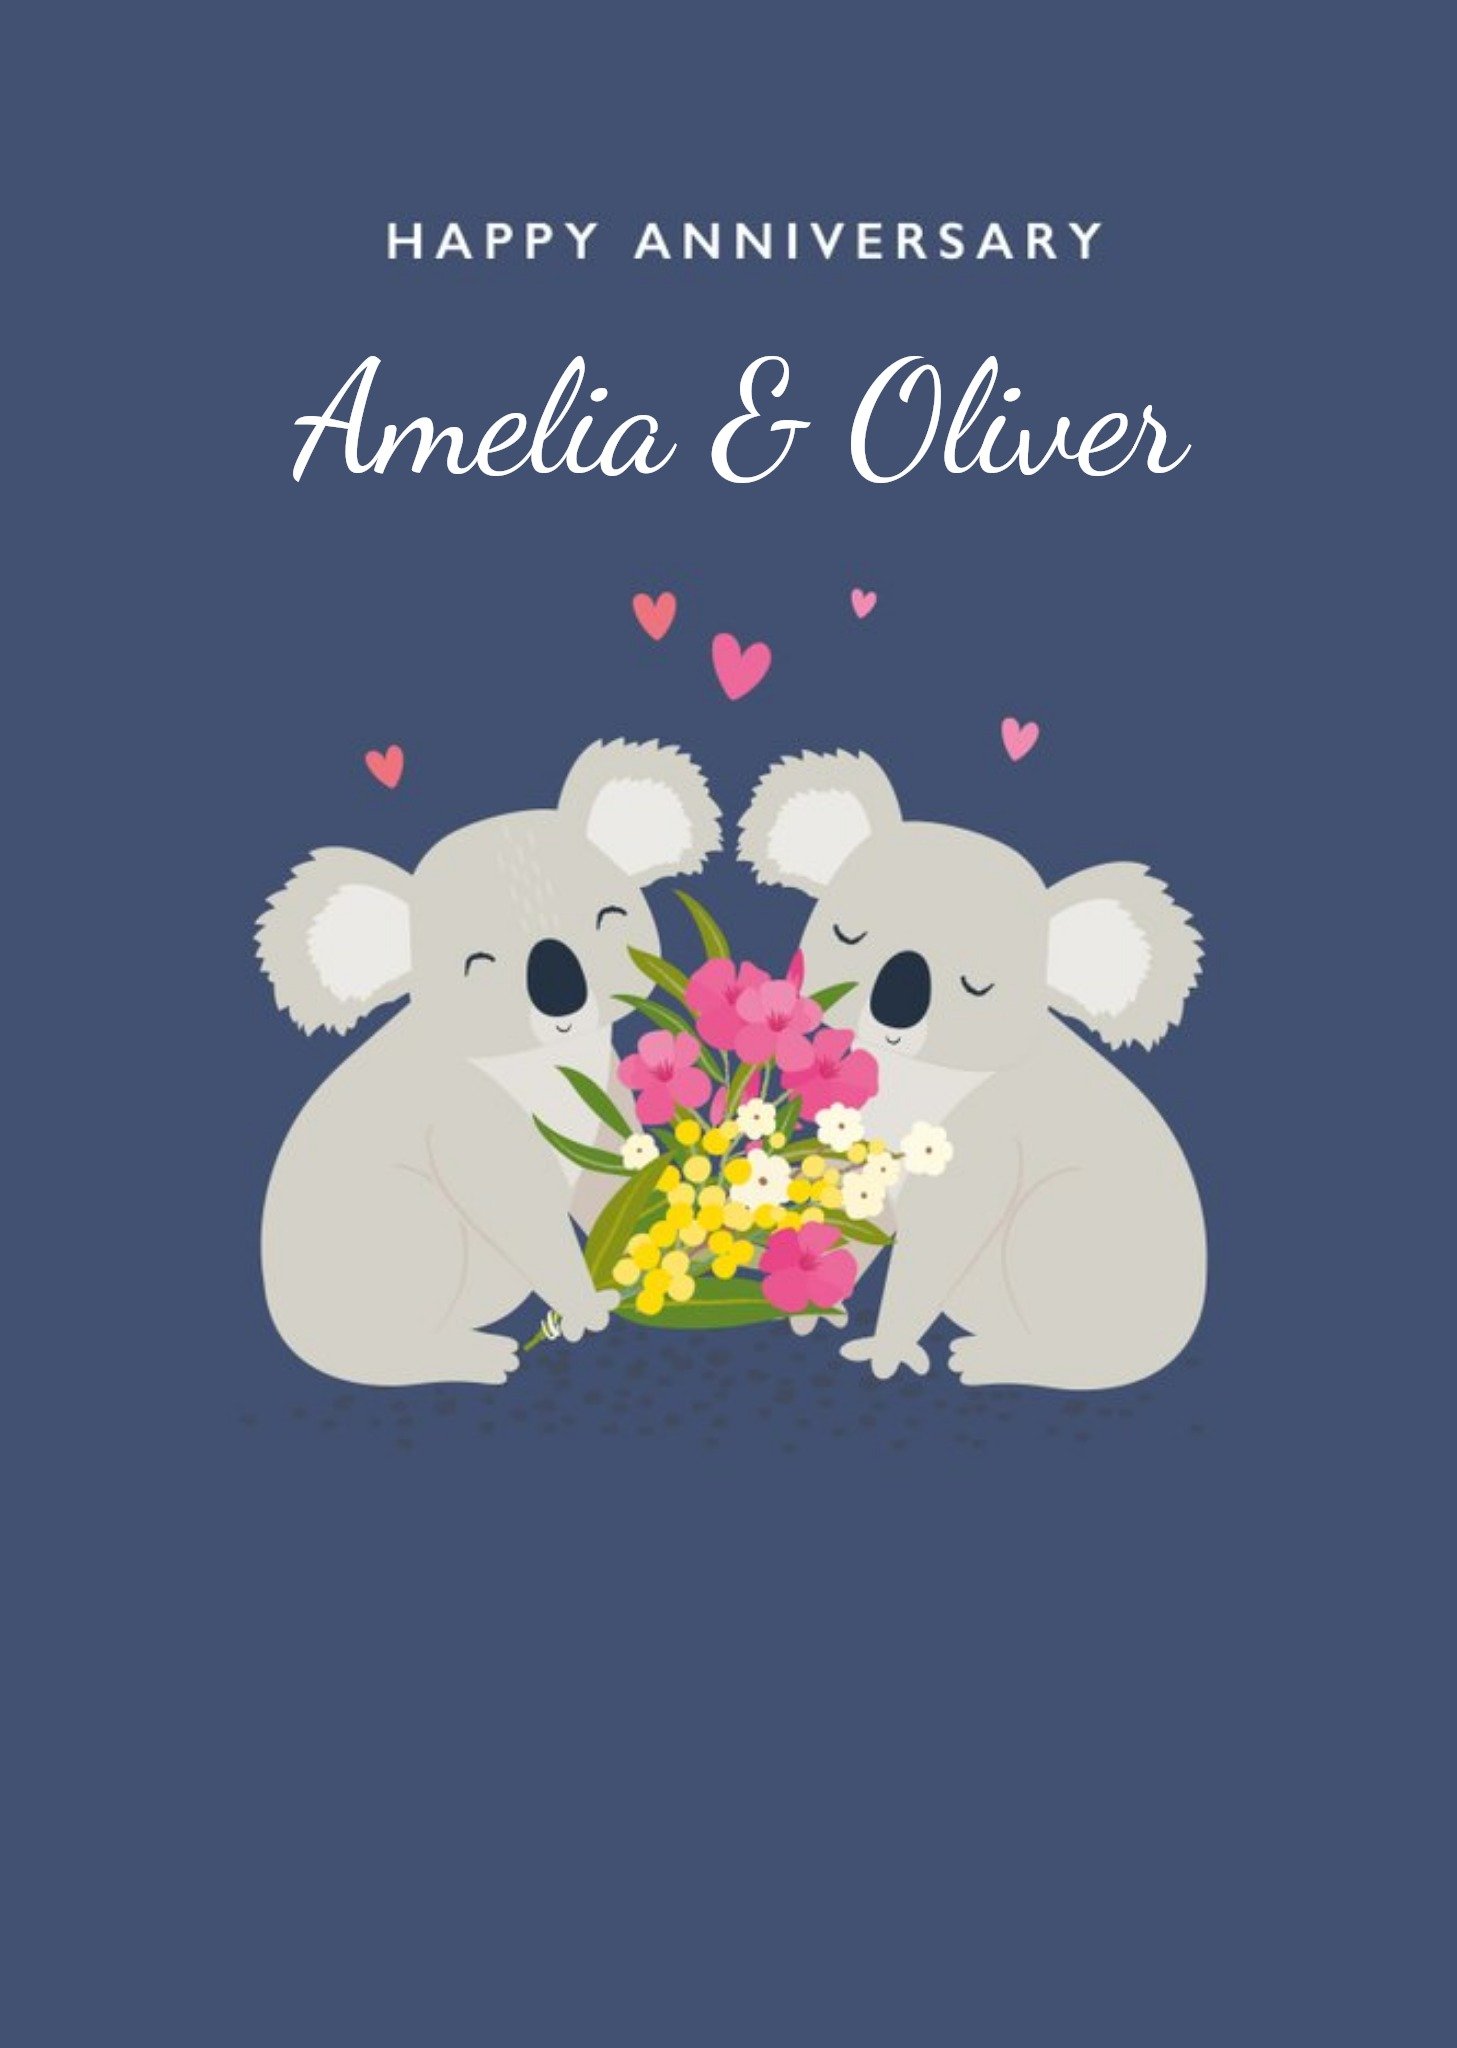 Moonpig Cute Illustration Of A Pair Of Koalas With Flowers On A Blue Background Anniversary Card, La